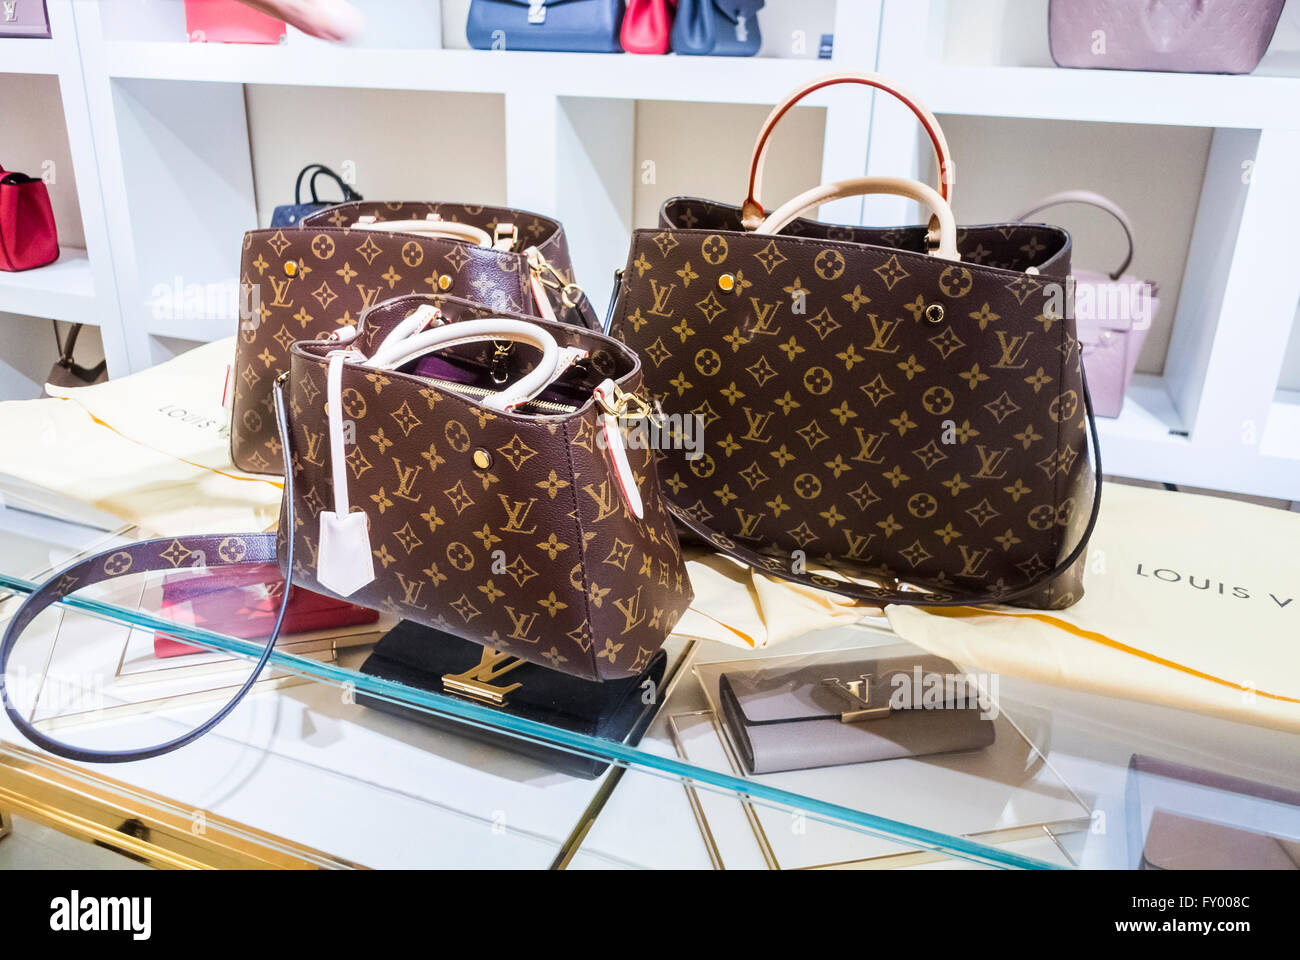 Paris, France, Detail, Shopping inside Luxury Stores in Galeries Stock Photo: 102647788 - Alamy